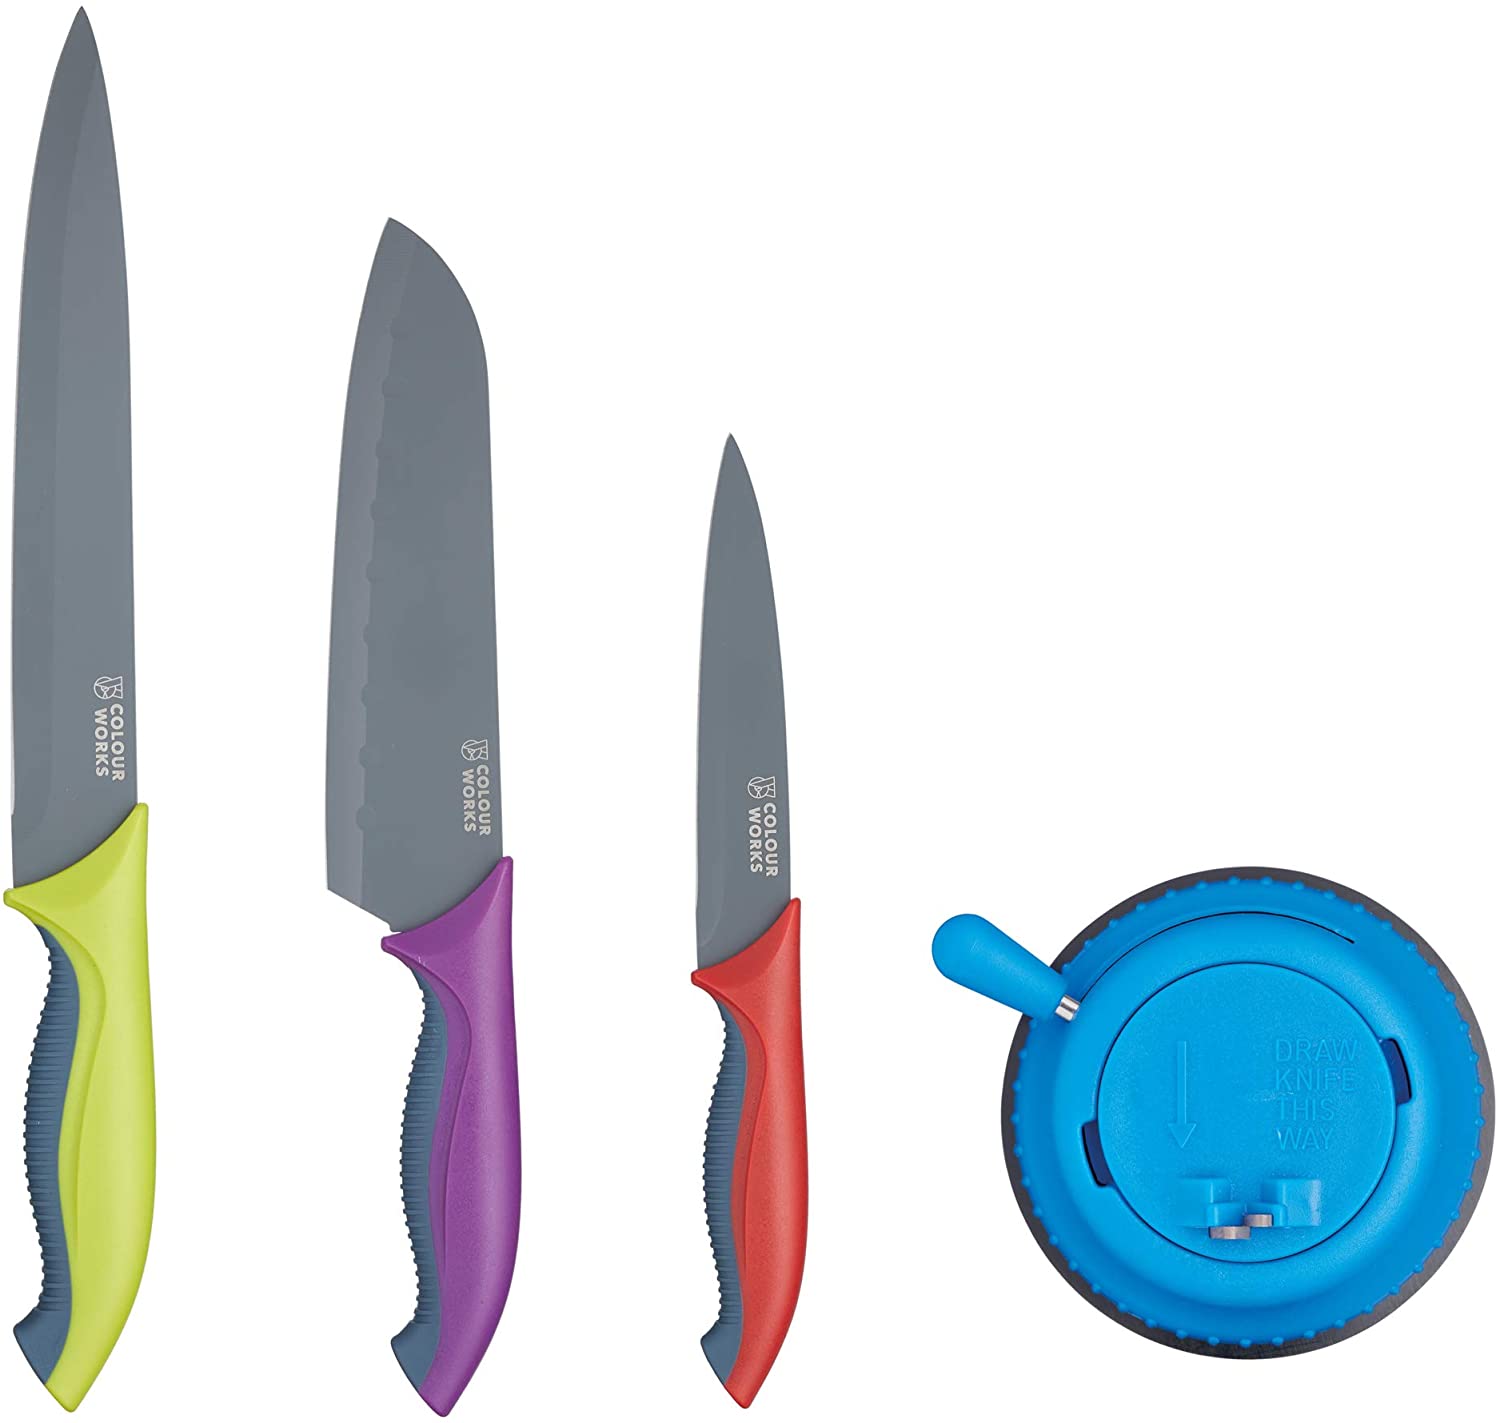 Colourworks Kitchen Knife Set with Knife Sharpener in Gift Box, Stainless Steel - Multicoloured (3 Kitchen Knives and Sharpener)